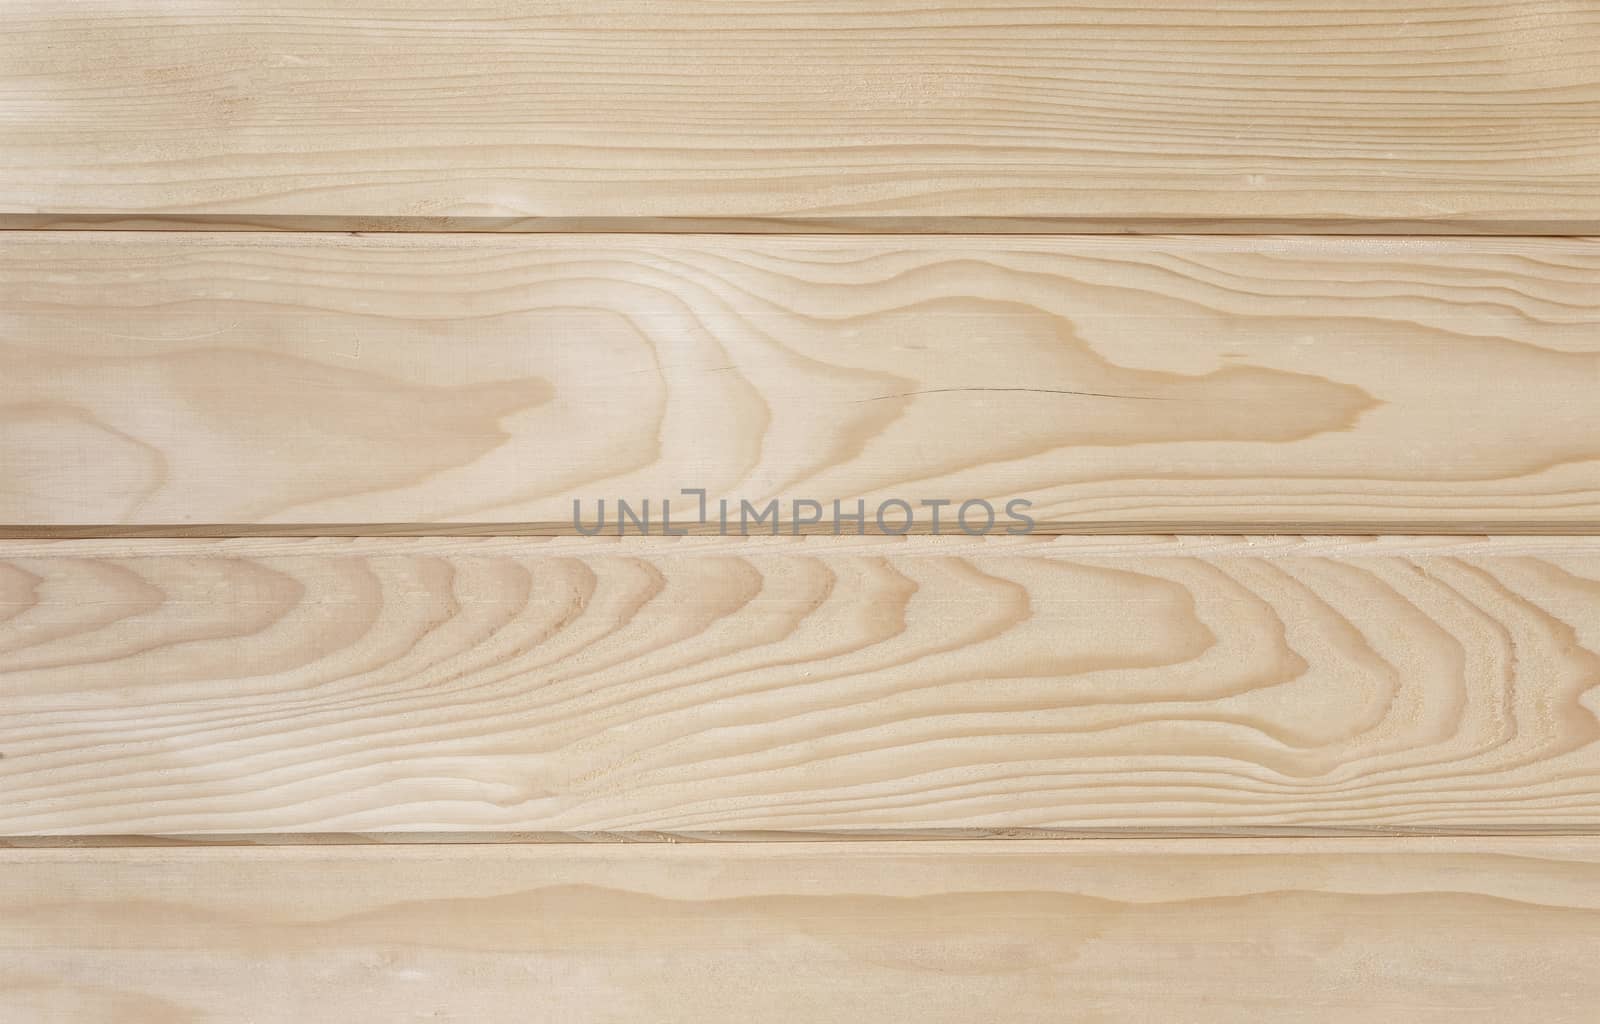 Horizontal wooden unpainted boards for the background and labels